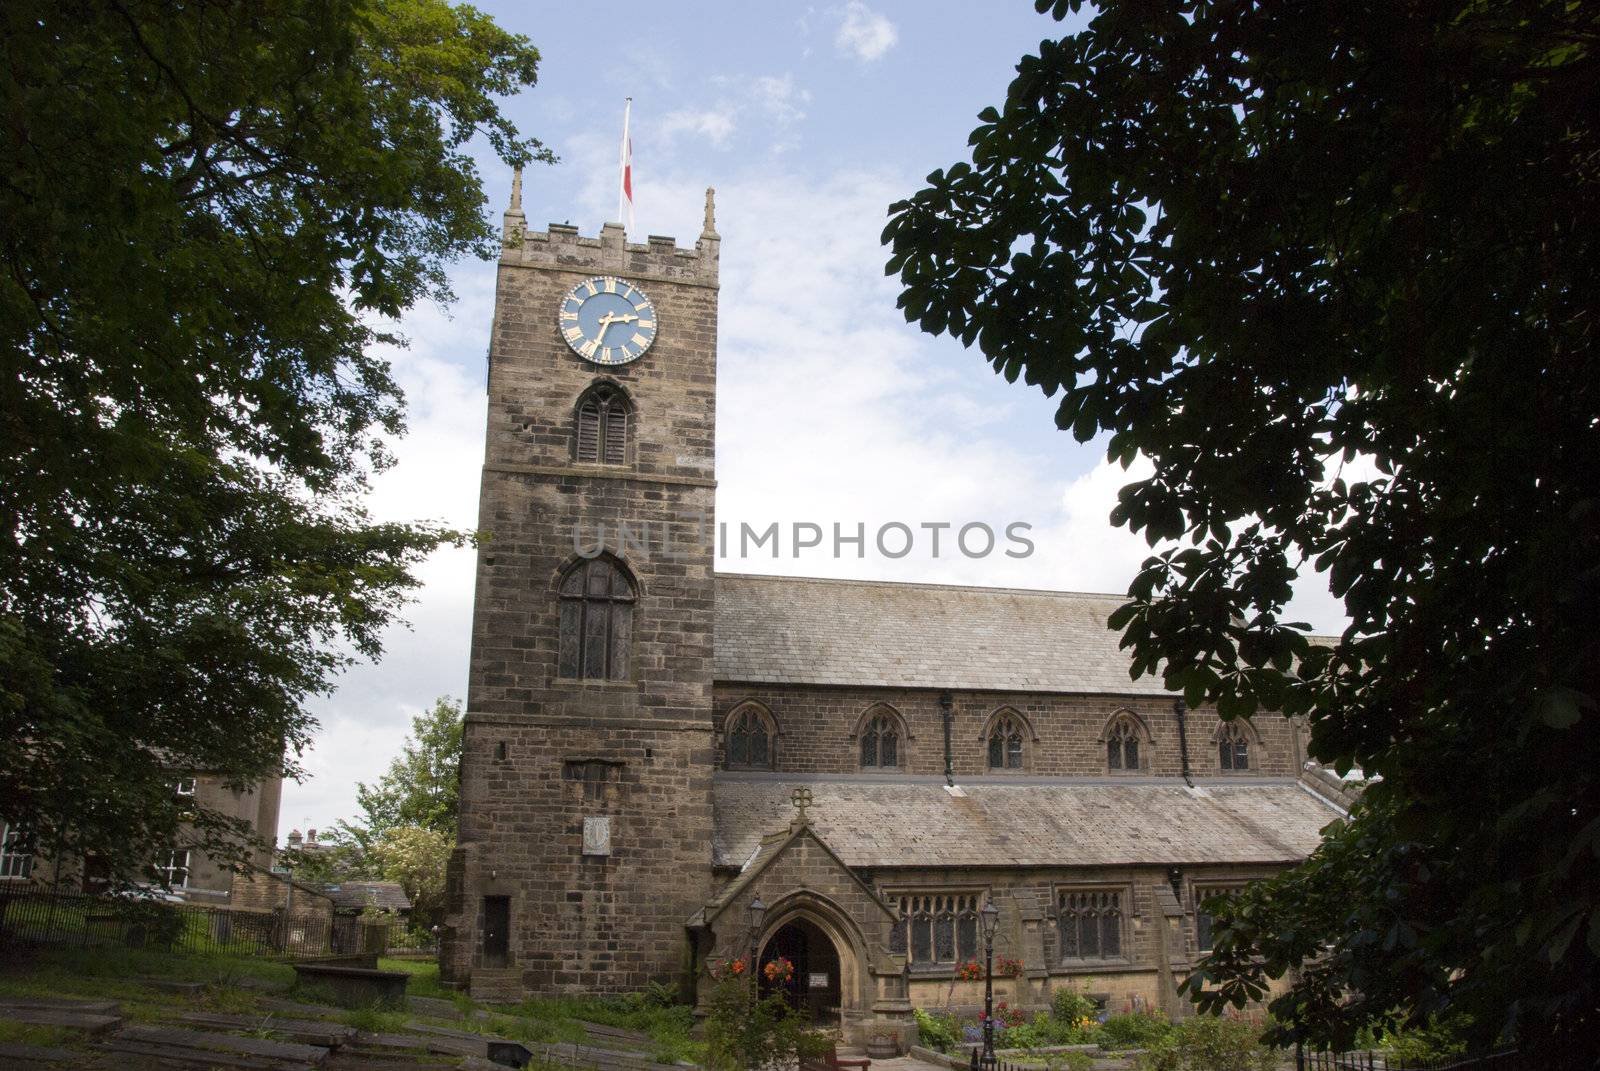 The Parish Church of St Michael and All Angels in Haworth Yorkshire under a blue summer sky